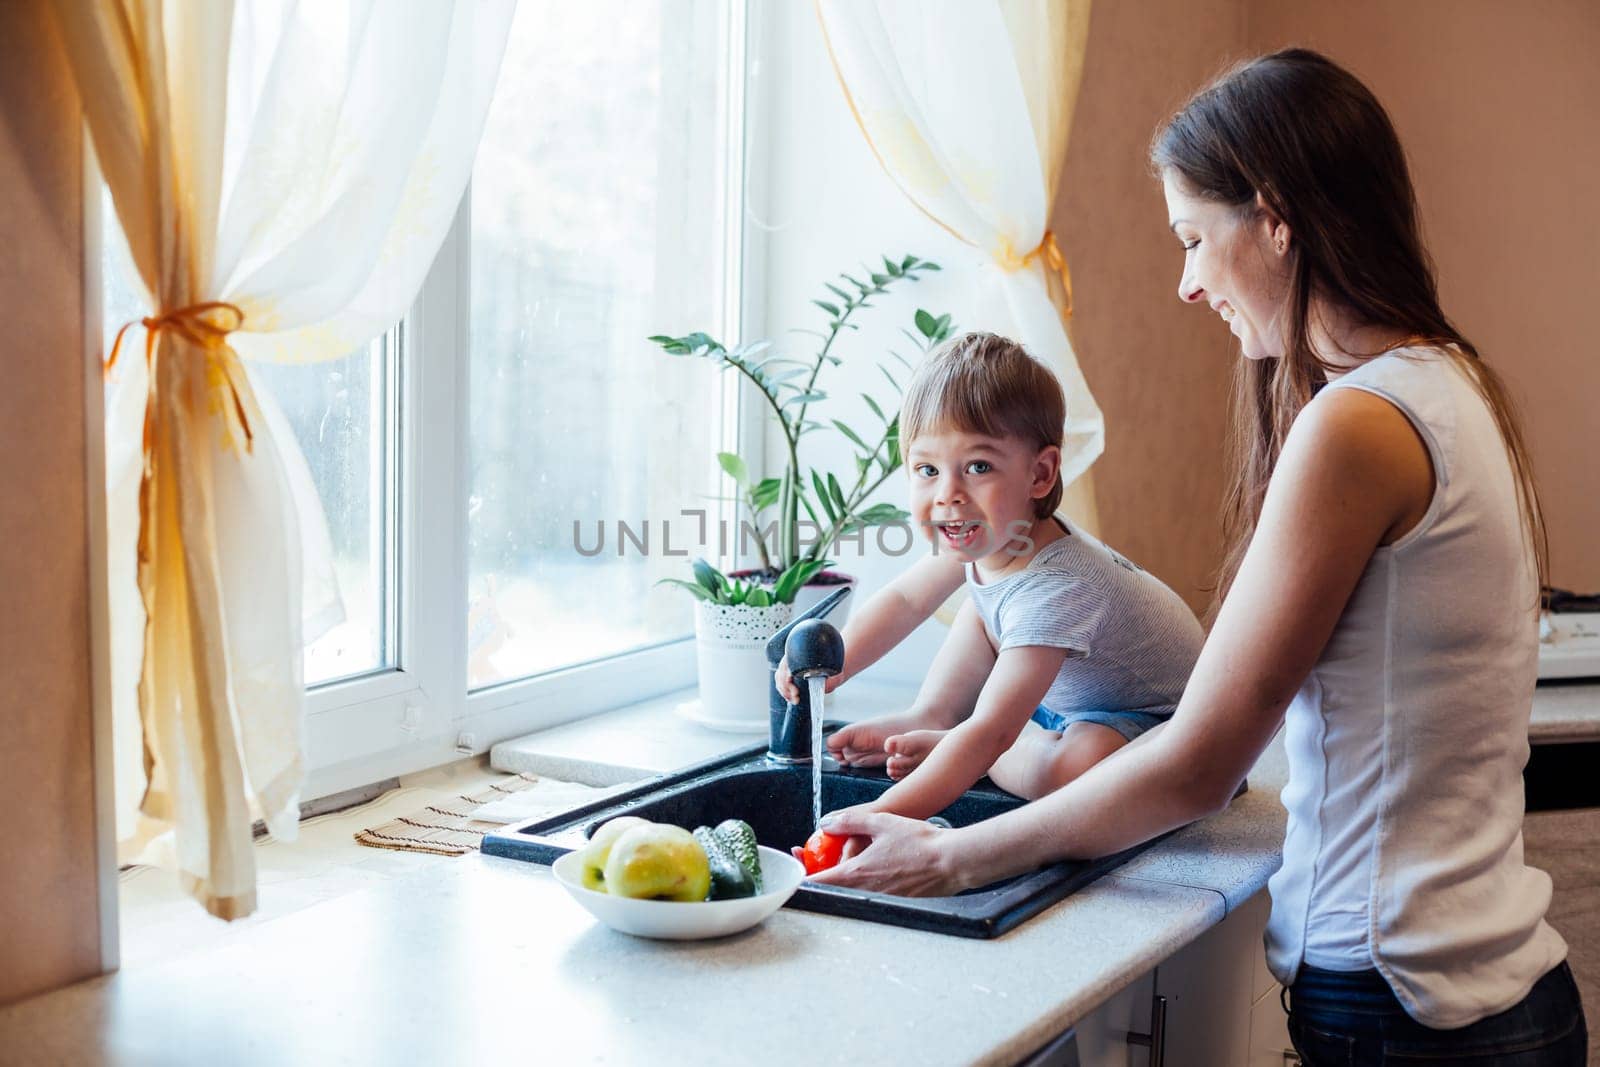 mother and young son wash their vegetables in the kitchen sink